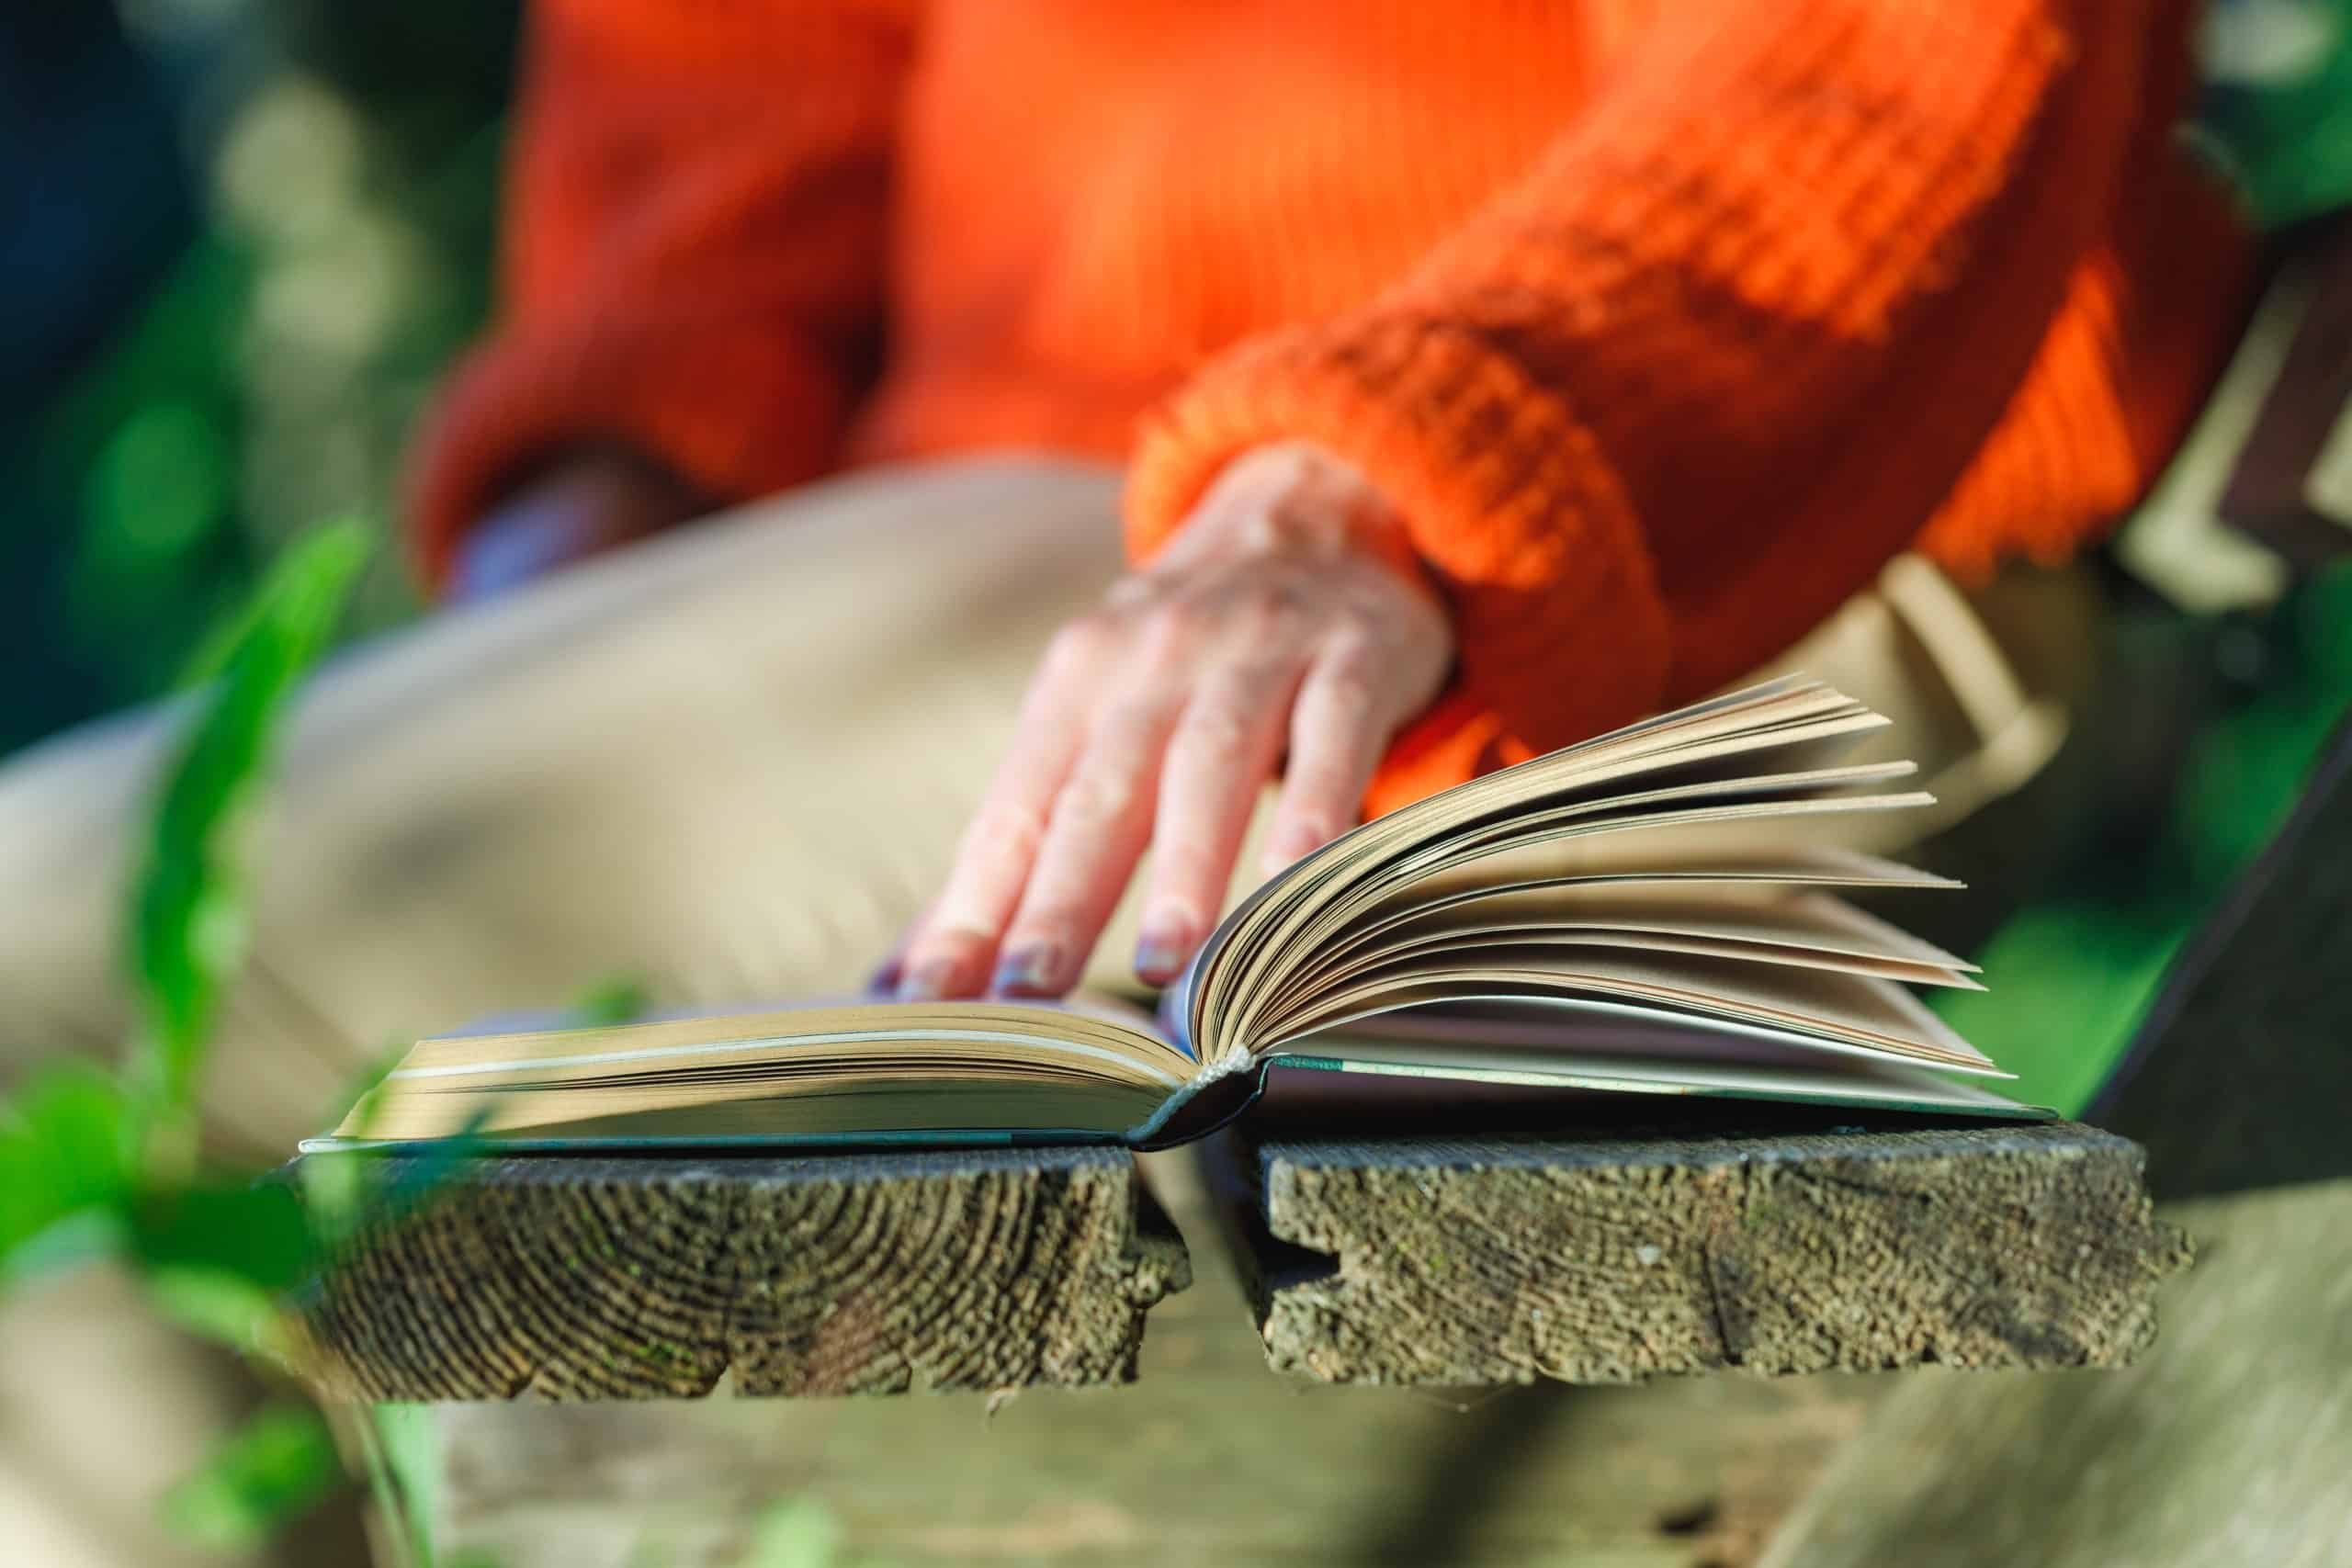 A woman leafs through the pages of a book on a wooden bench outdoor with her hand.